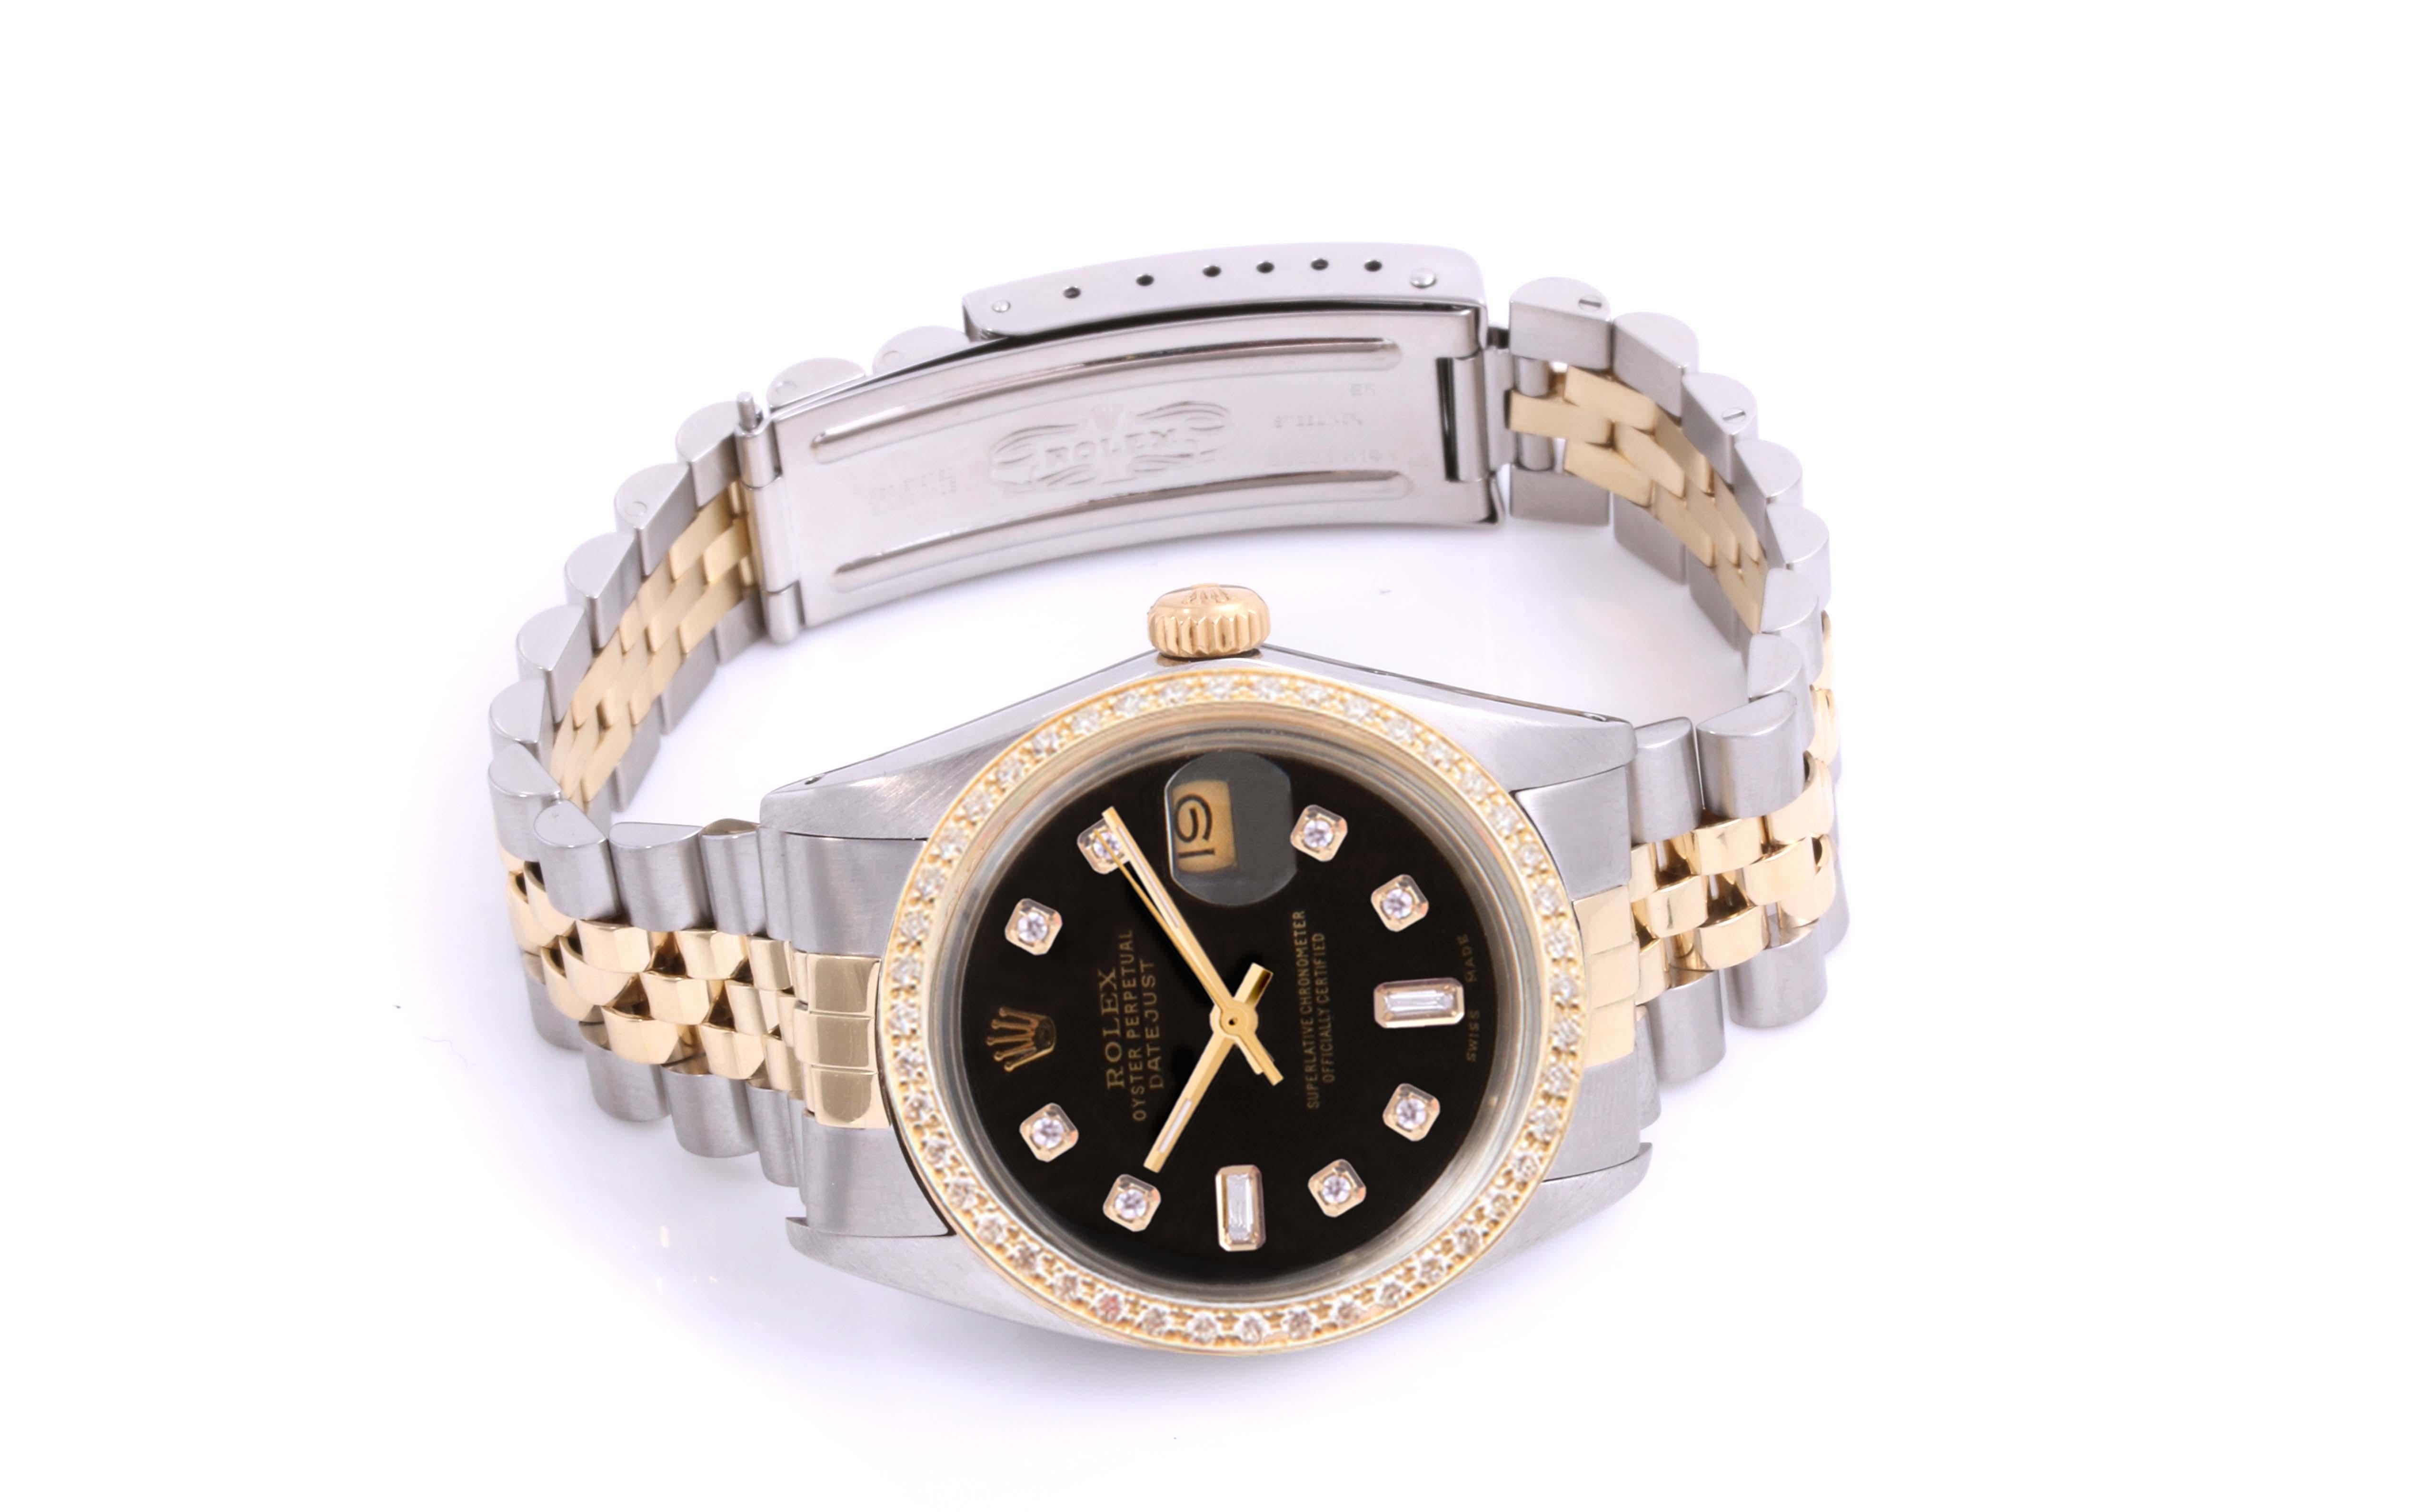 (Watch Description) 
Brand - Rolex
Gender - Ladies 
Model - 16013 Datejust 
Metals - Yellow Gold / Steel 
Case size - 36mm
Bezel - Yellow gold Diamond
Crystal - Sapphire
Movement - Automatic Cal.3035
Dial - Refinished Black Diamond
Wrist band - Two